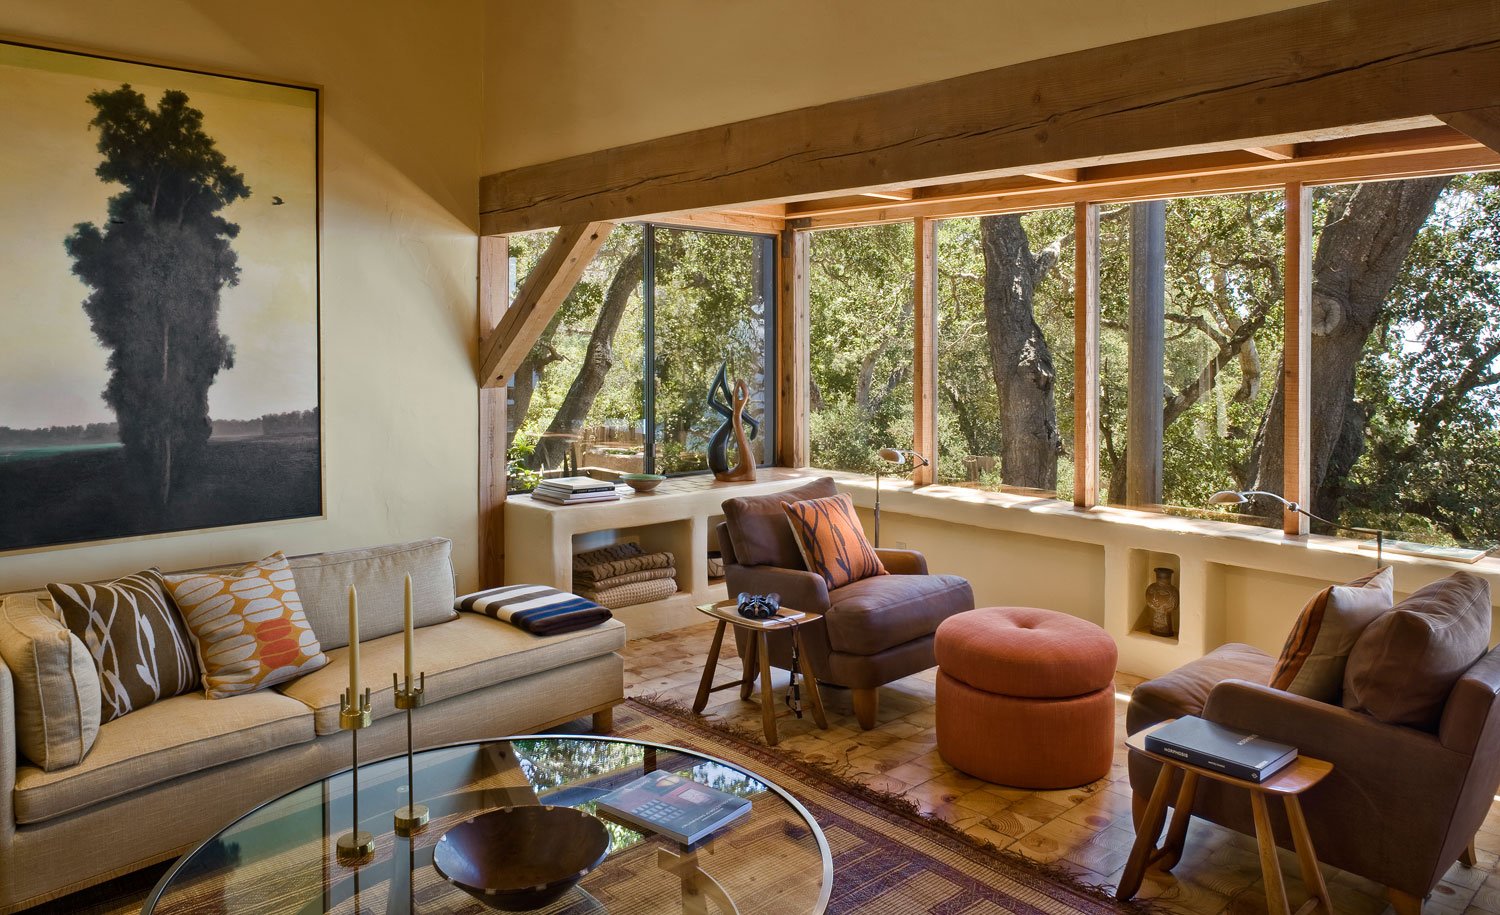 Big Sur Cabin with Mid-Century Accent Pieces and Earth Tone Palette by Studio Schicketanz-07